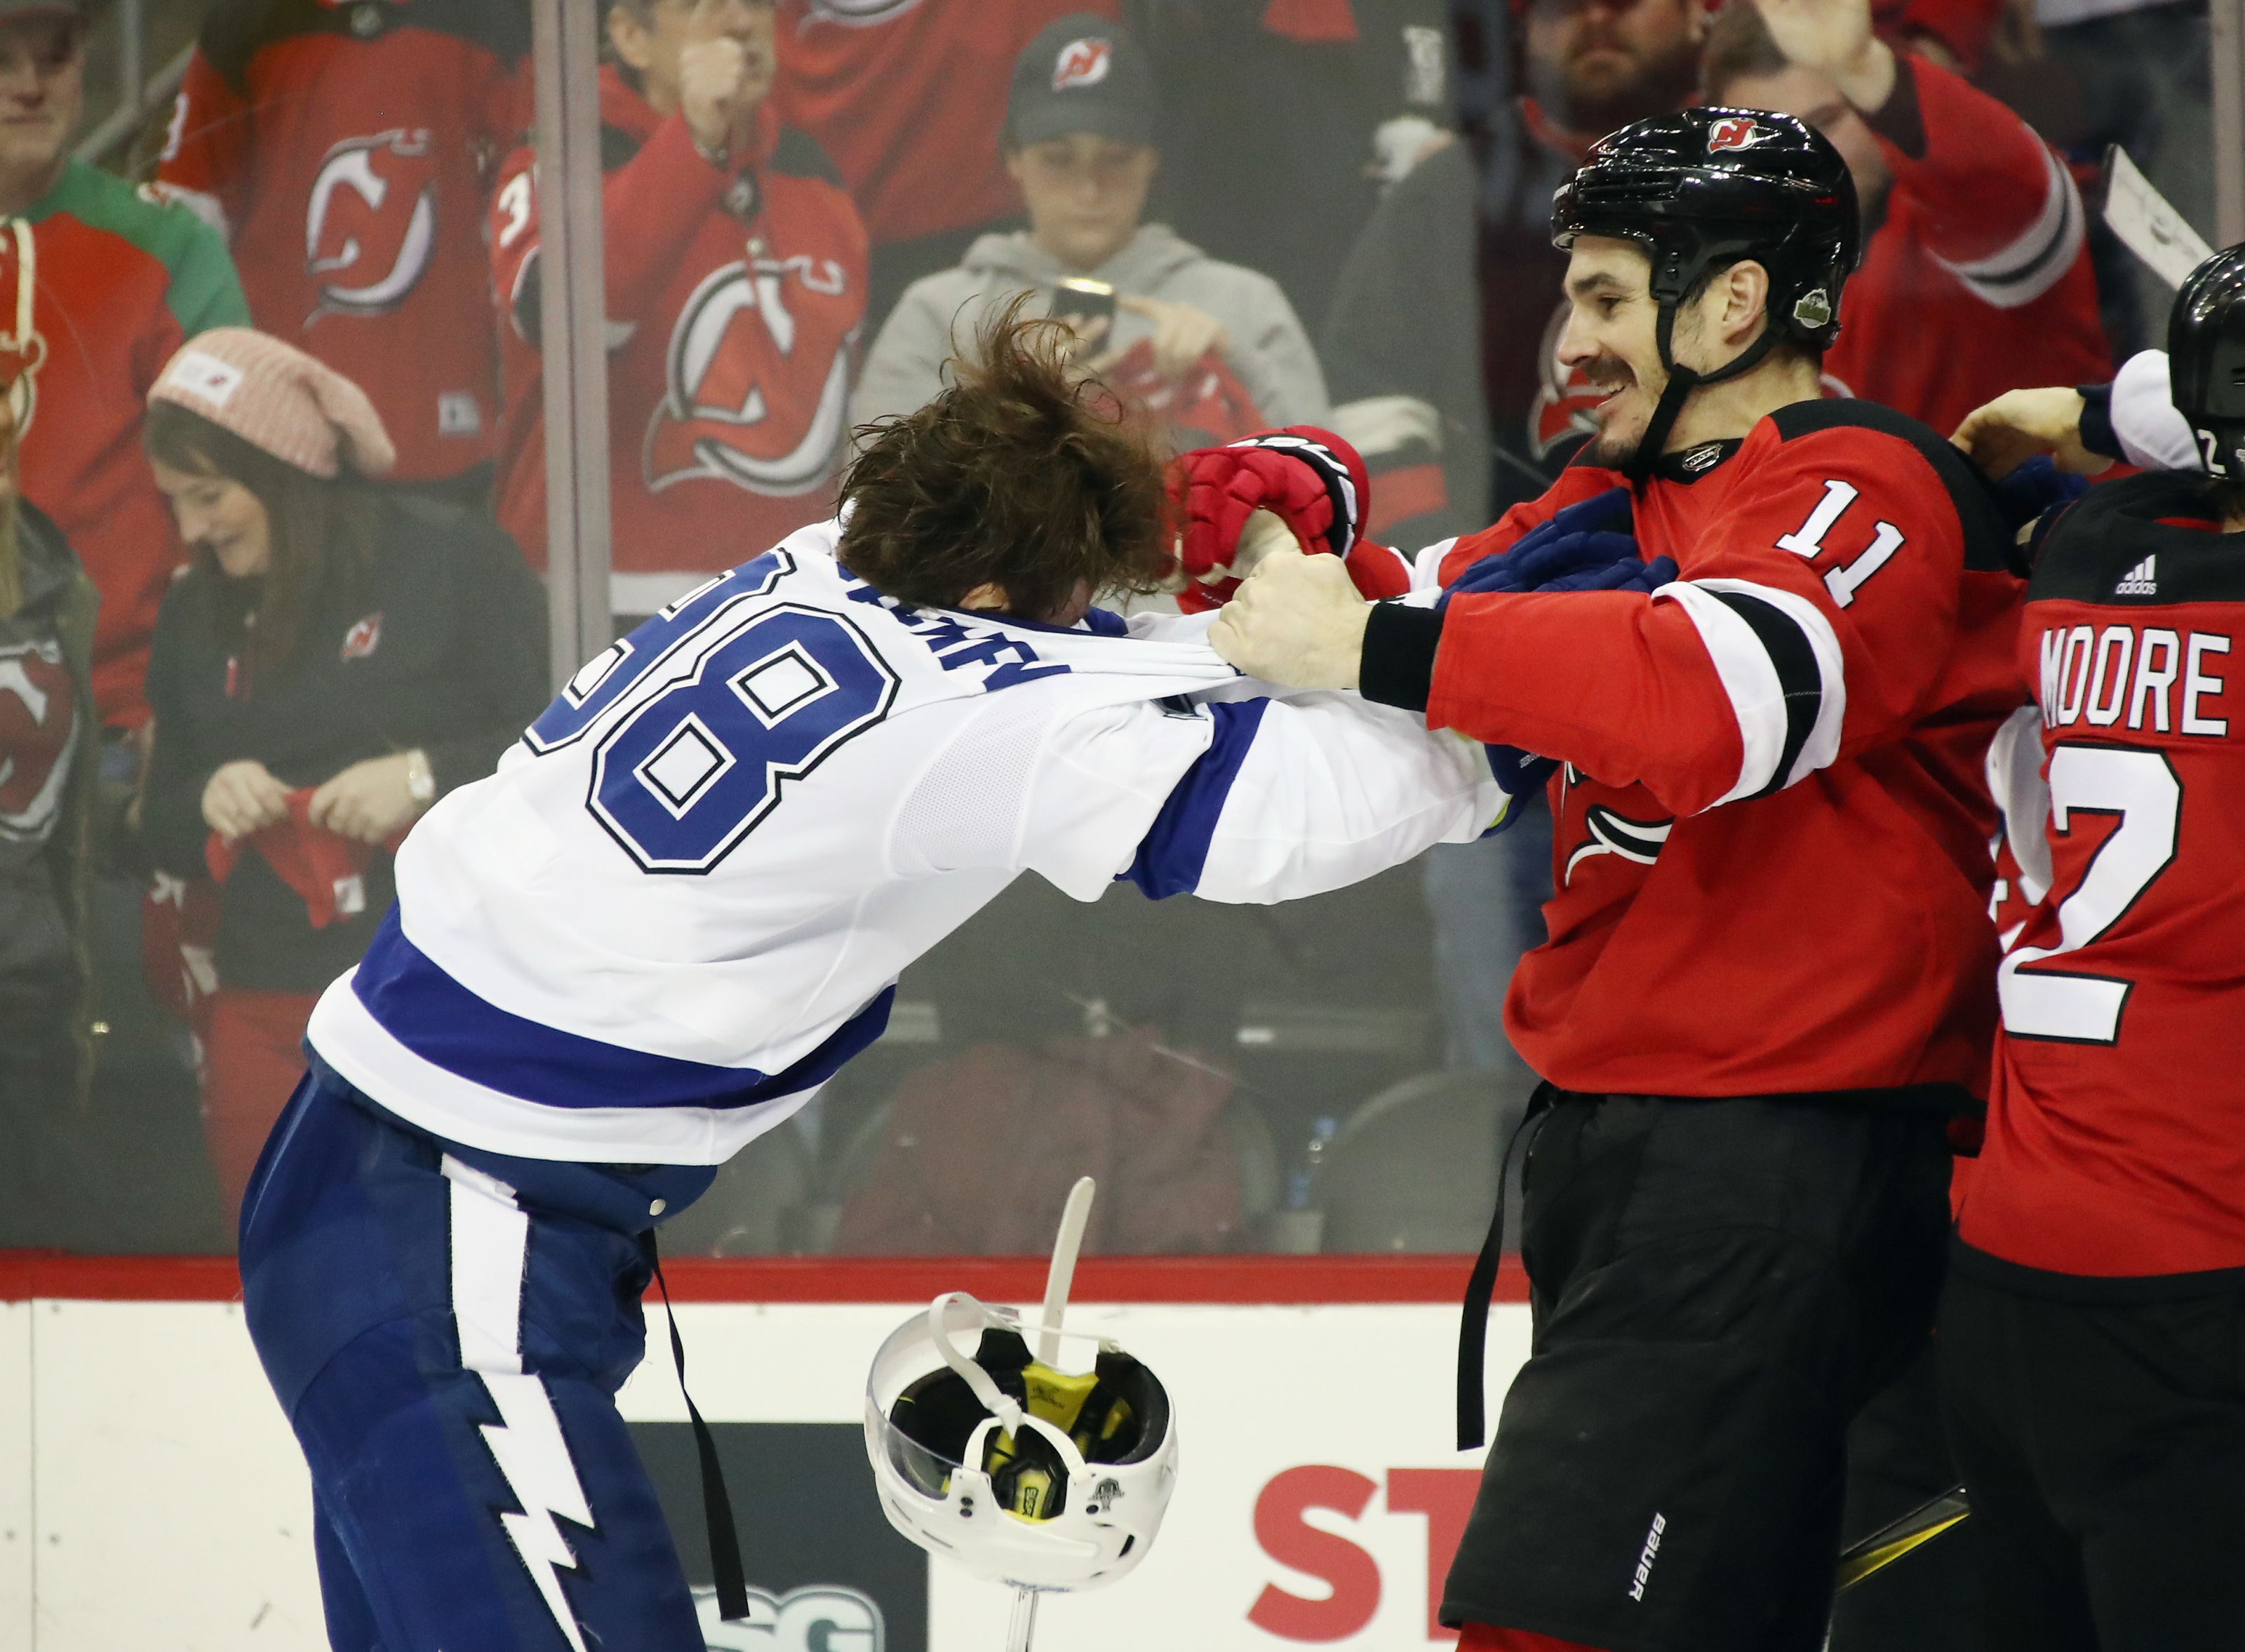 It goes beyond hockey': While Brian Boyle will be missed, his